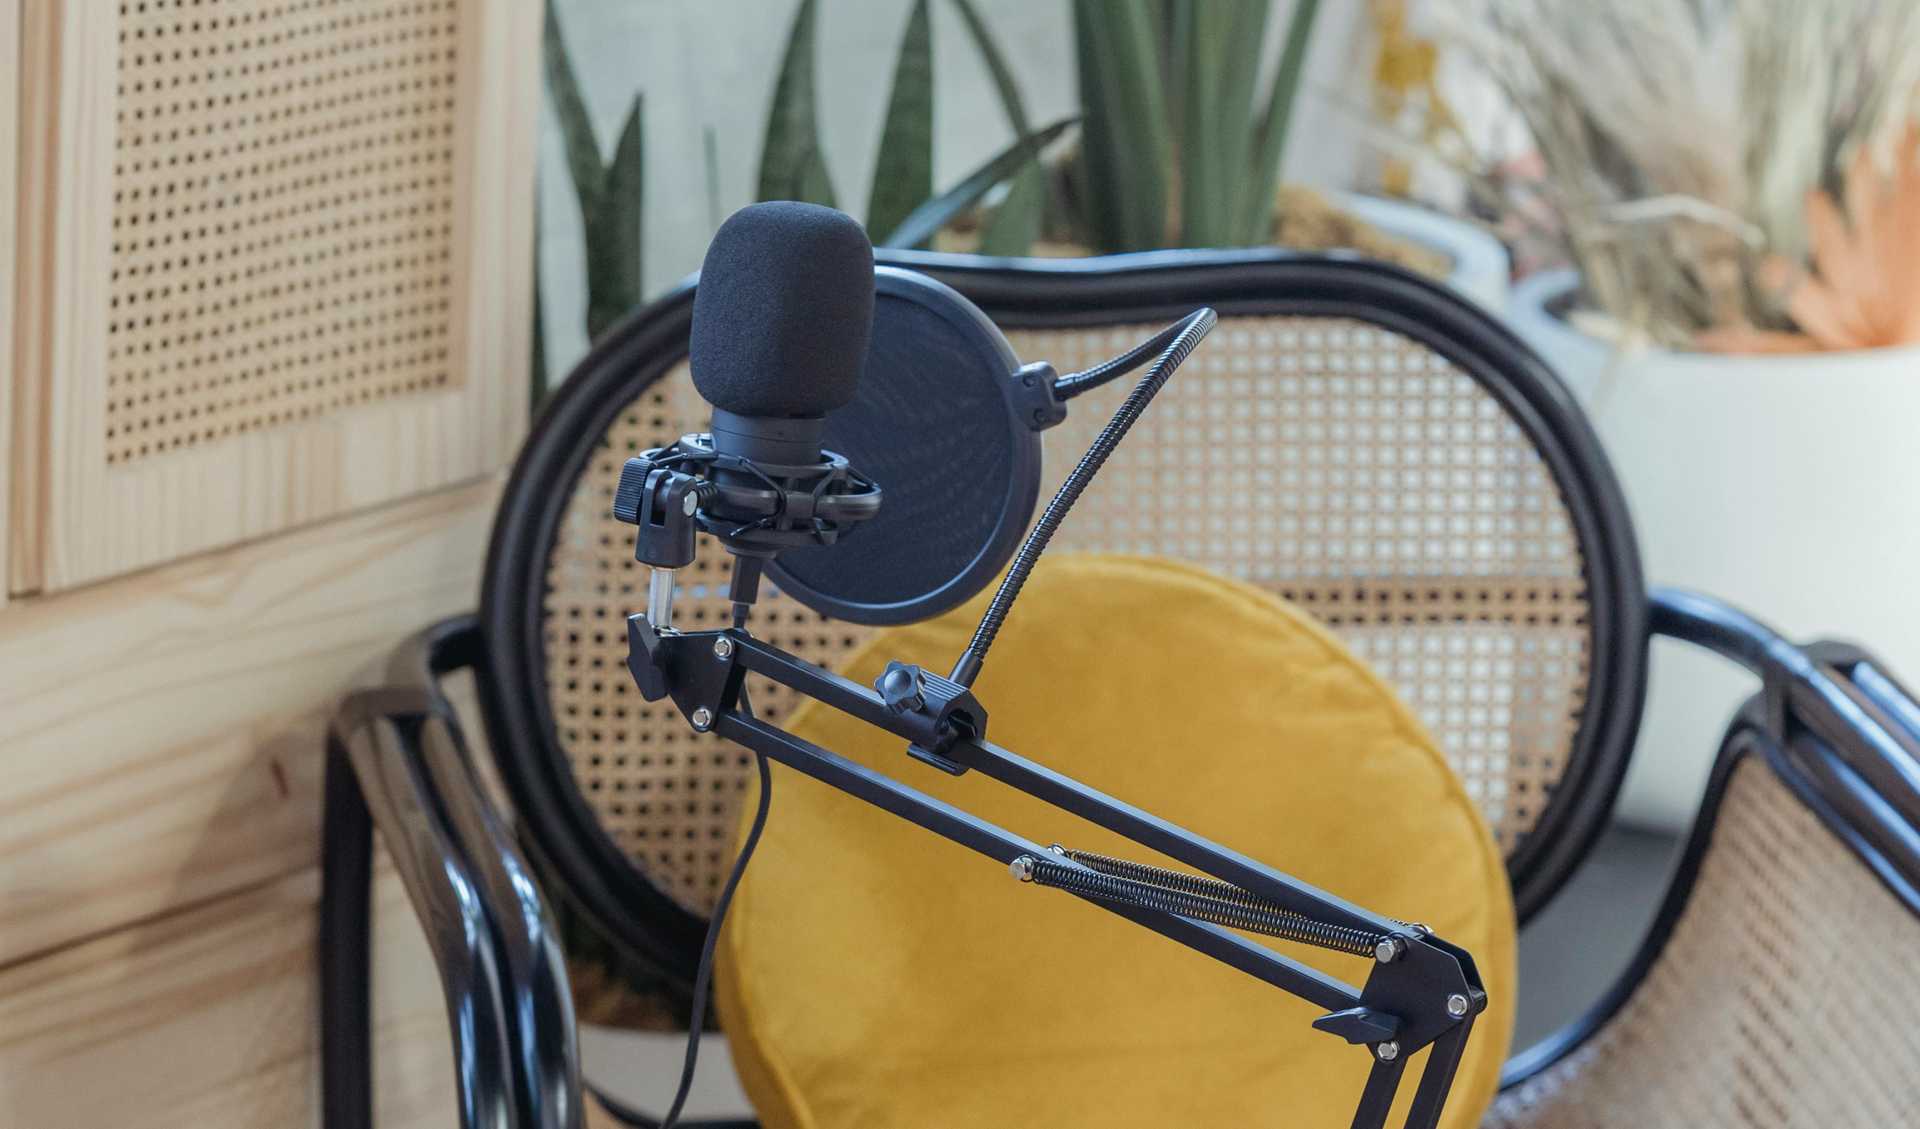 Laptop and microphone in front of a chair